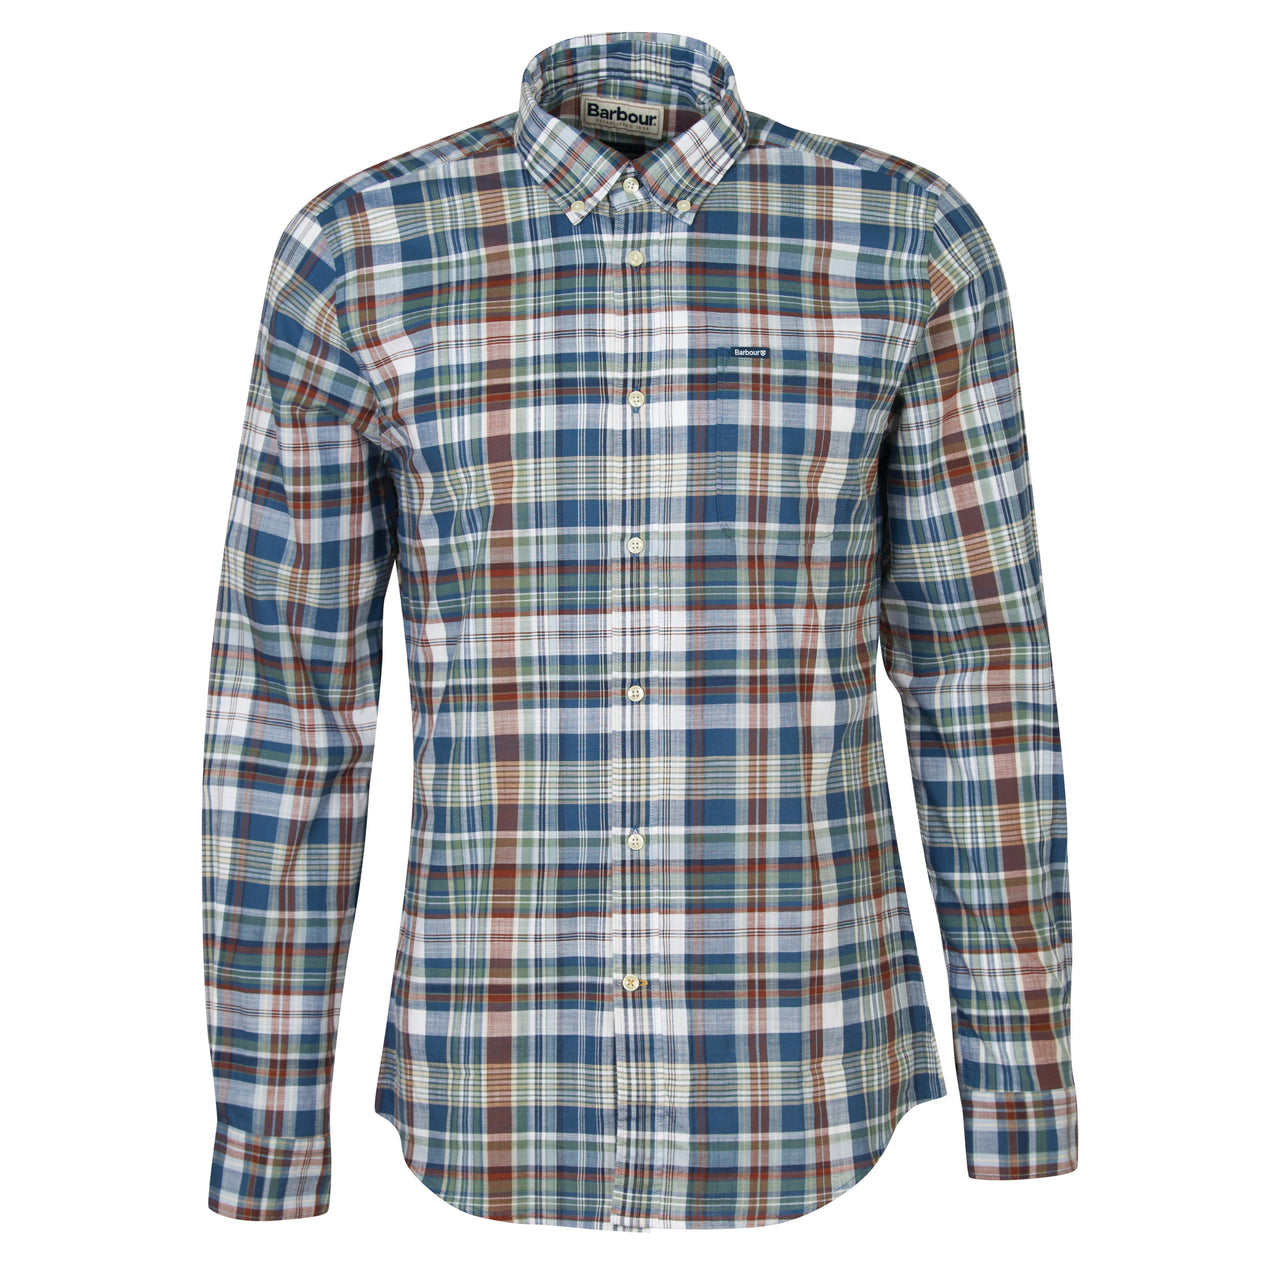 BARBOUR Seacove Tailored Shirt BLUE